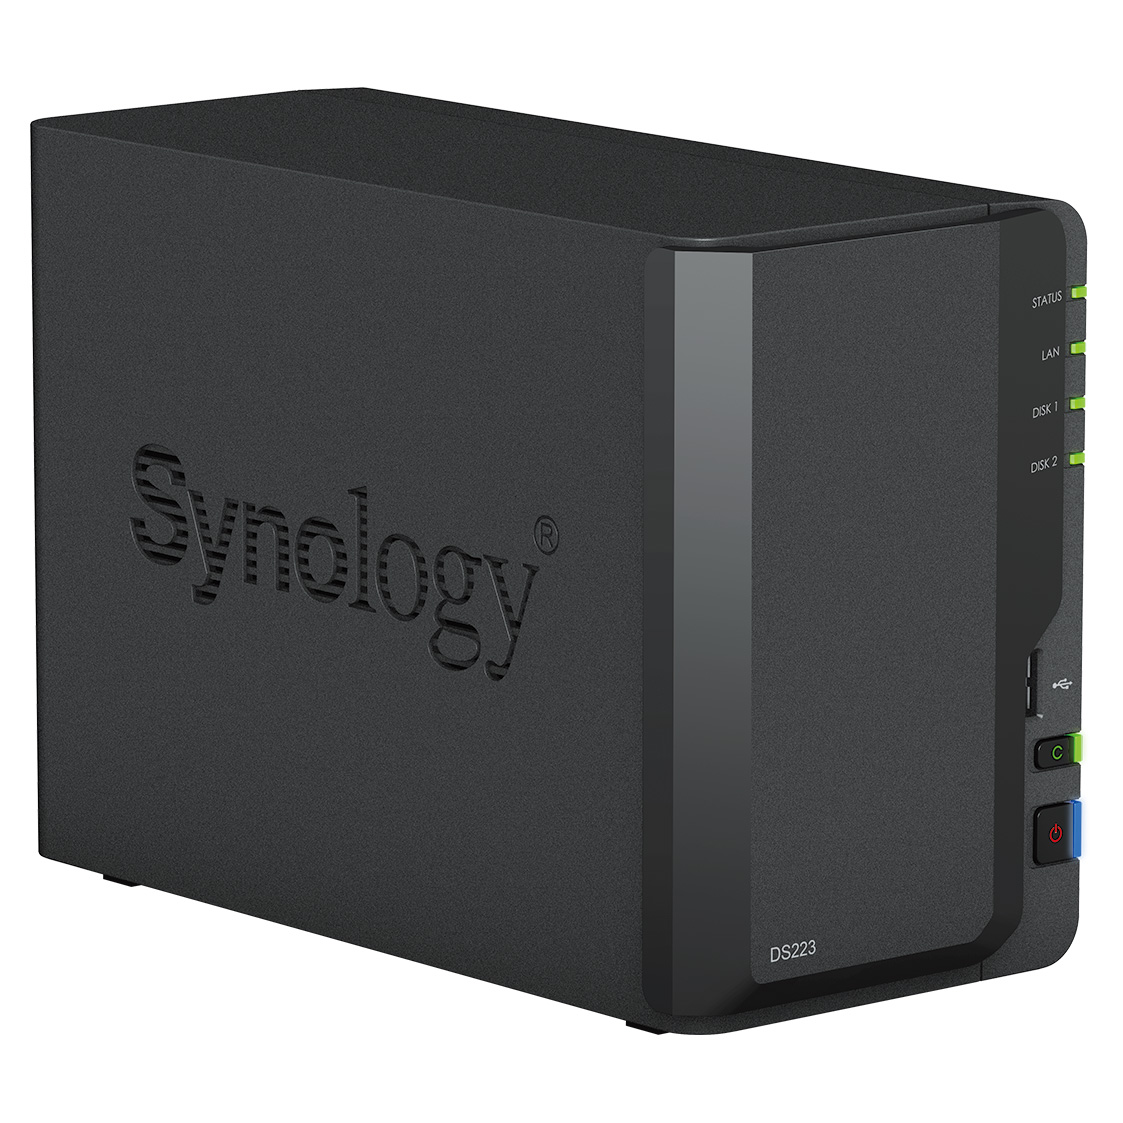 SYNOLOGY Serveur NAS 2 baies - DS223